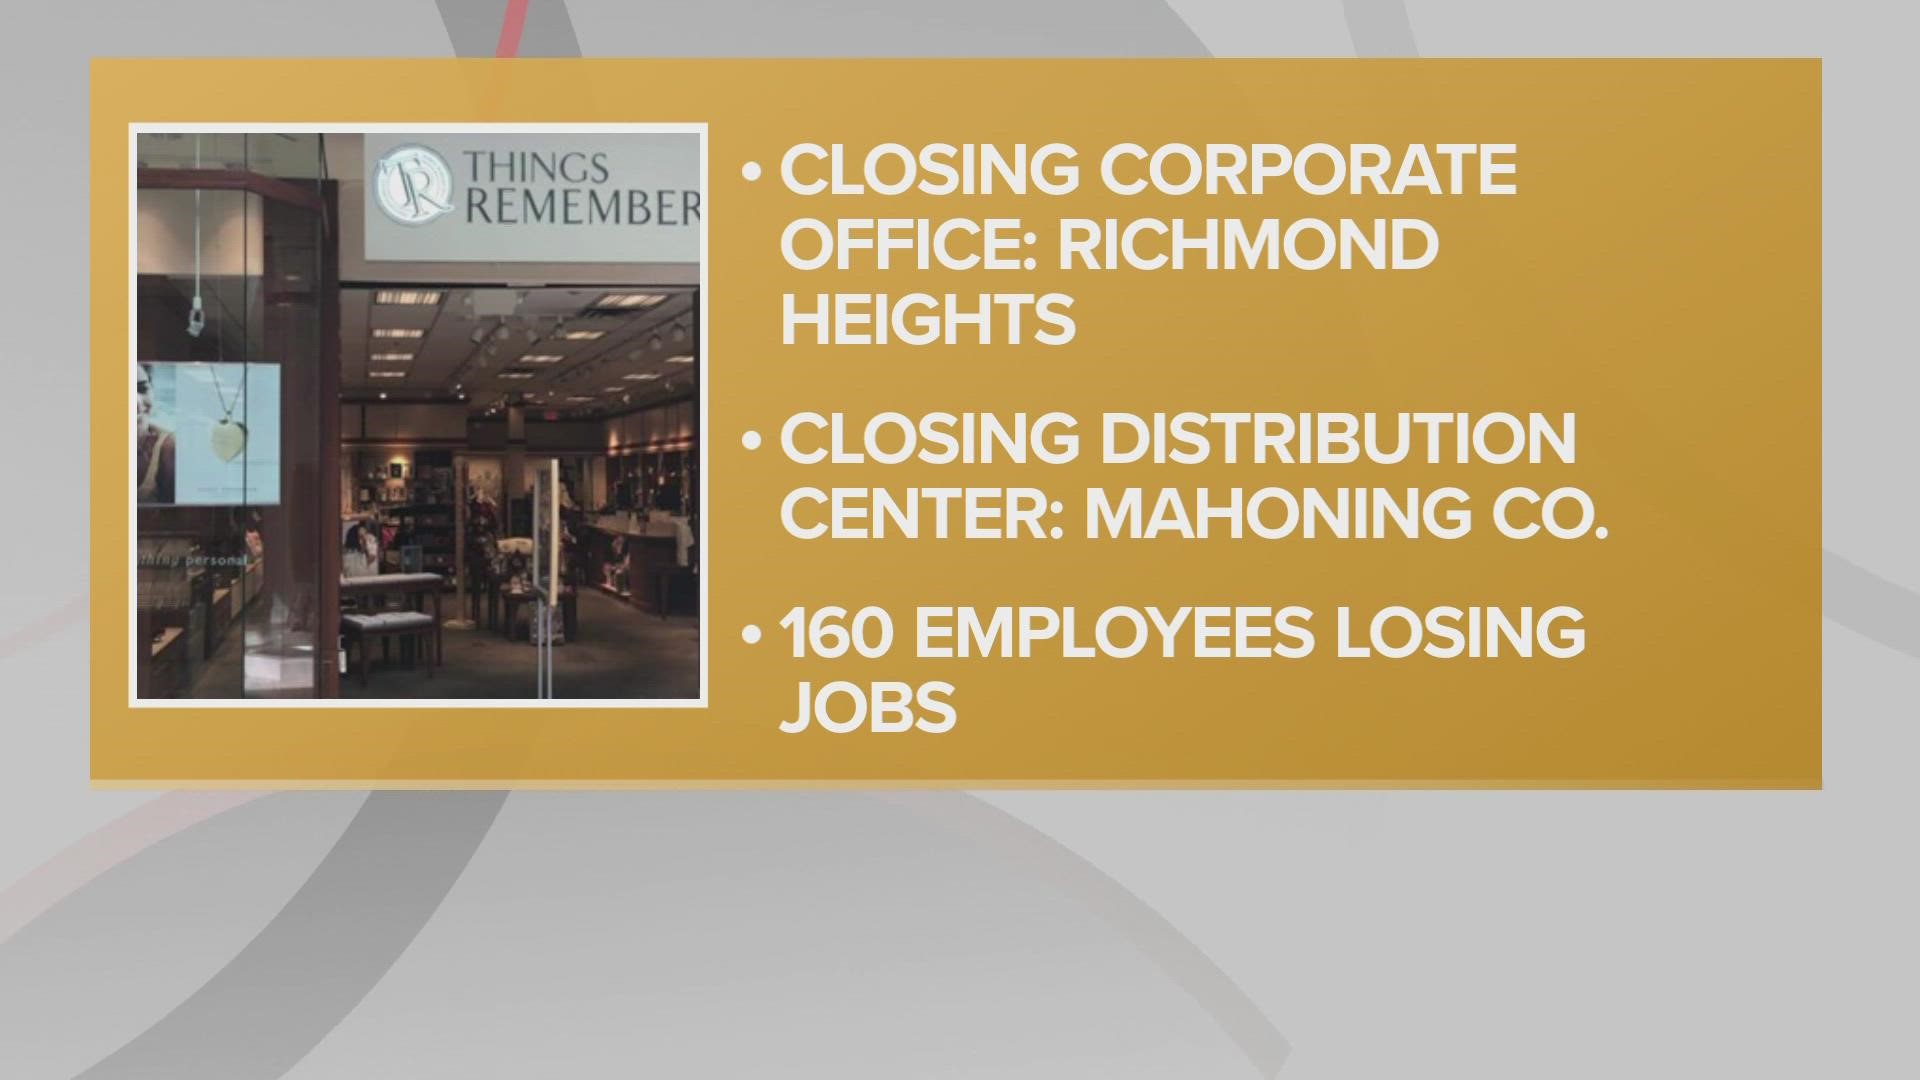 More than 160 jobs will be lost, according to the company's filing with the Ohio Department of Job and Family Services.